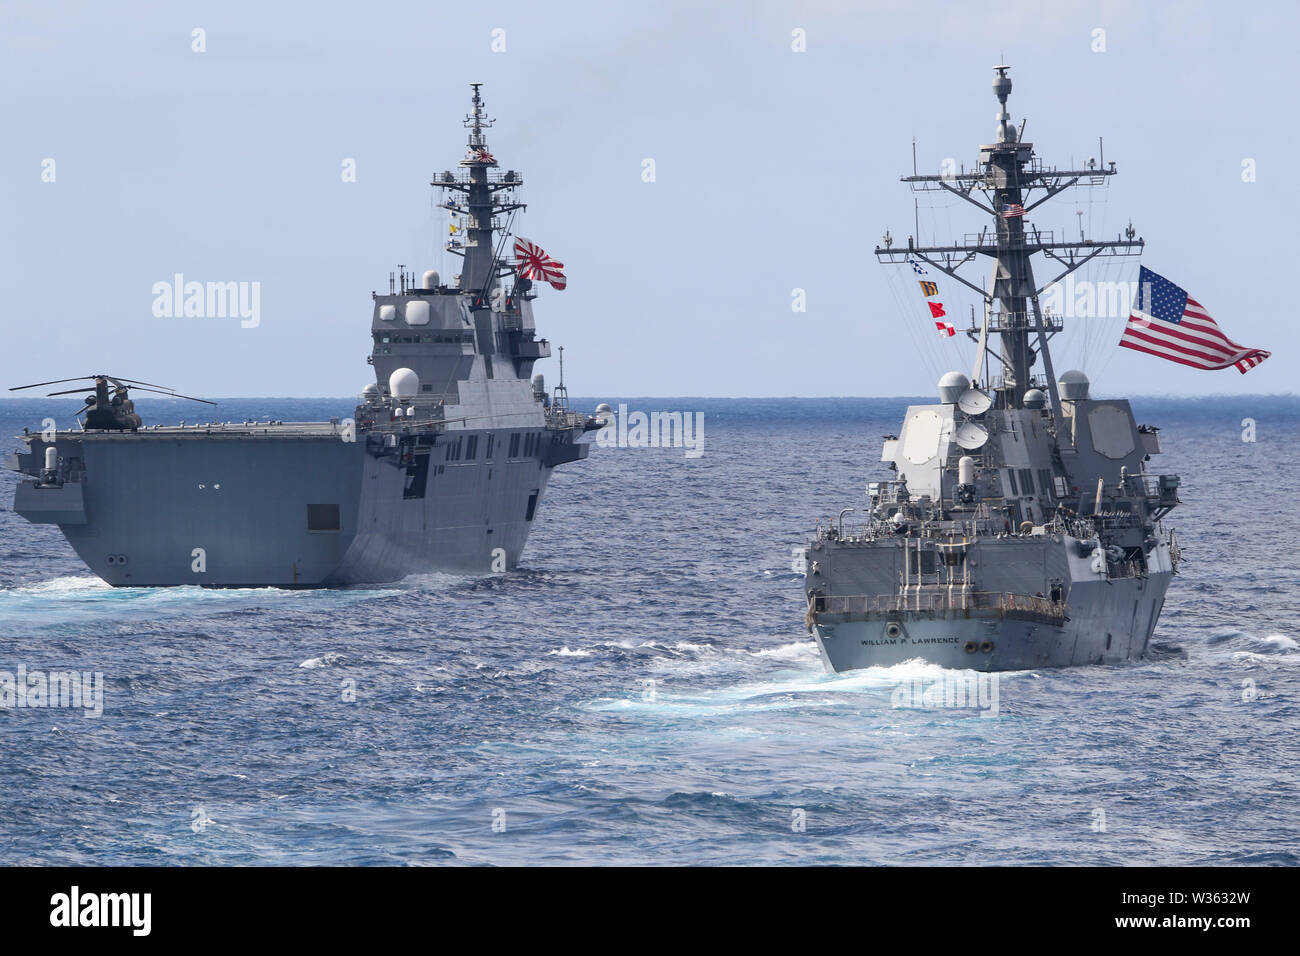 190711-N-DX072-1012 TASMAN SEA (July 11, 2019) The Japan Maritime Self-Defense Force Hyūga-class helicopter destroyer JS Ise (DDH 182), left, and the U.S. Navy Arleigh Burke-class guided-missile destroyer USS William P. Lawrence (DDG 110) transit with the amphibious transport dock ship USS Green Bay (LPD 20) in a photo exercise (PHOTOEX) during Talisman Sabre 2019. Green Bay, part of the Wasp Expeditionary Strike Group, with embarked 31st Marine Expeditionary Unit, is currently participating in Talisman Sabre 2019 off the coast of Northern Australia. A bilateral, biennial event, Talisman Sabre Stock Photo